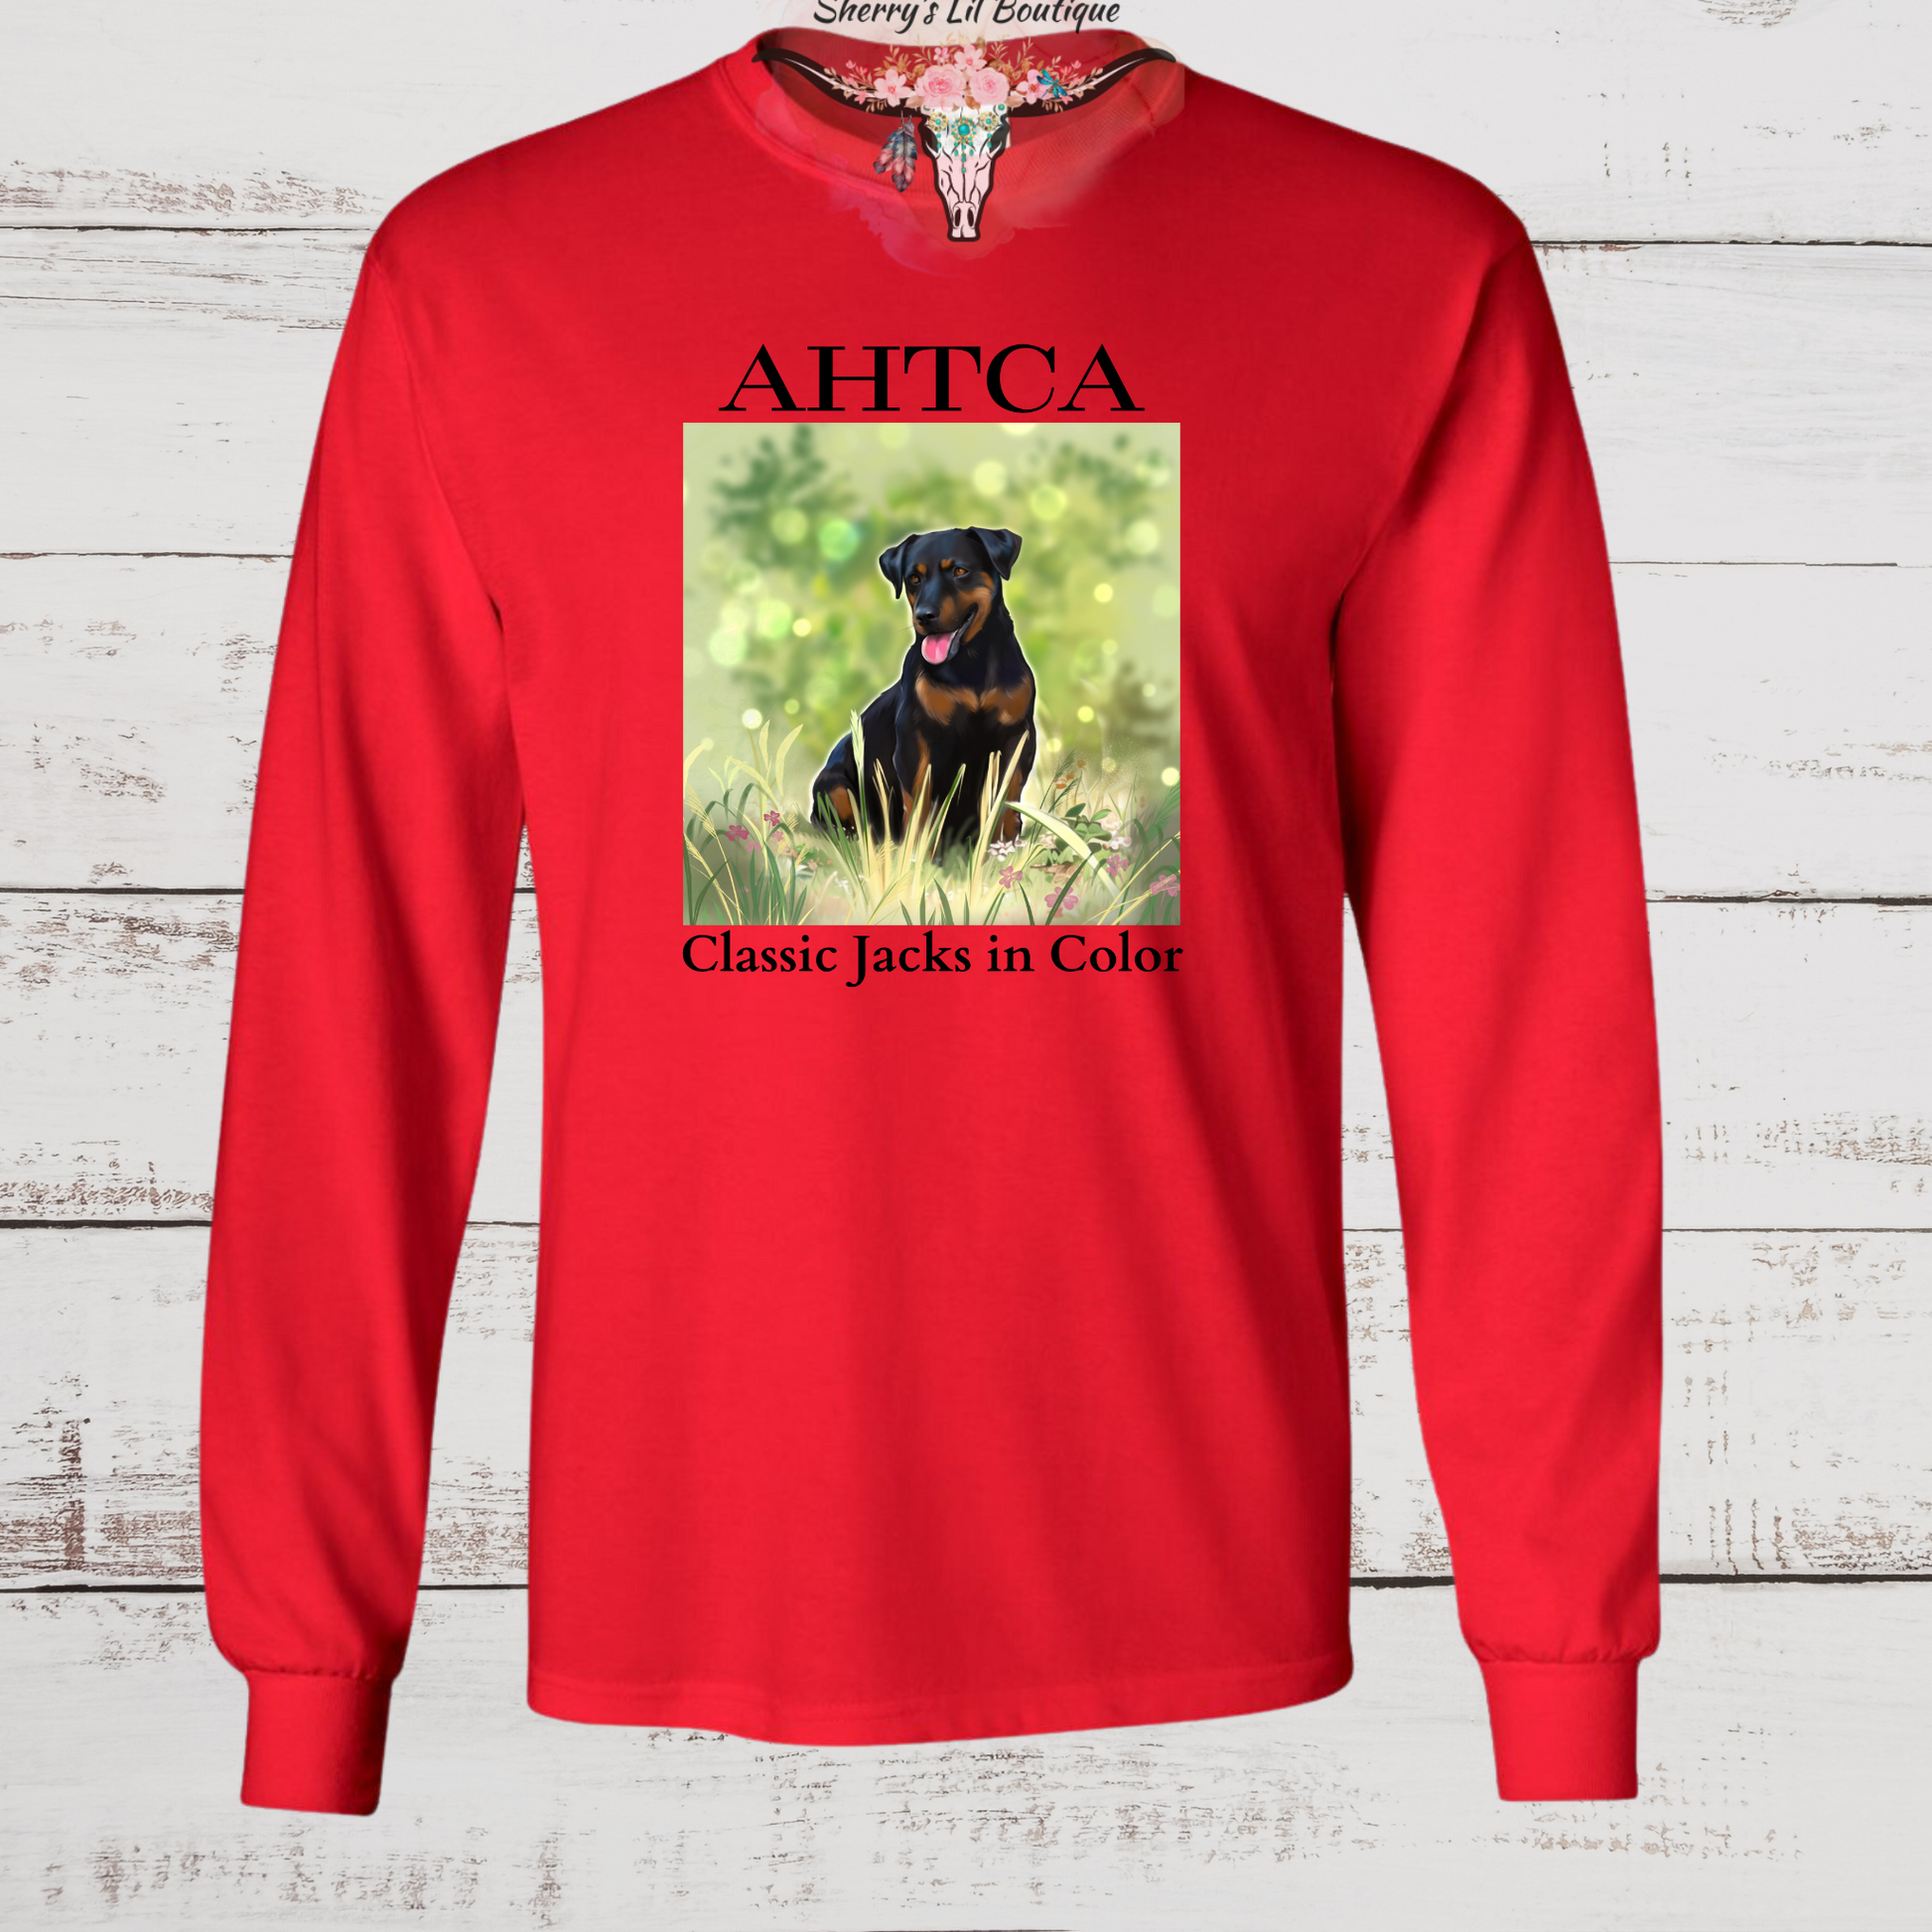 Red long sleeve tee with AHTCA graphic design